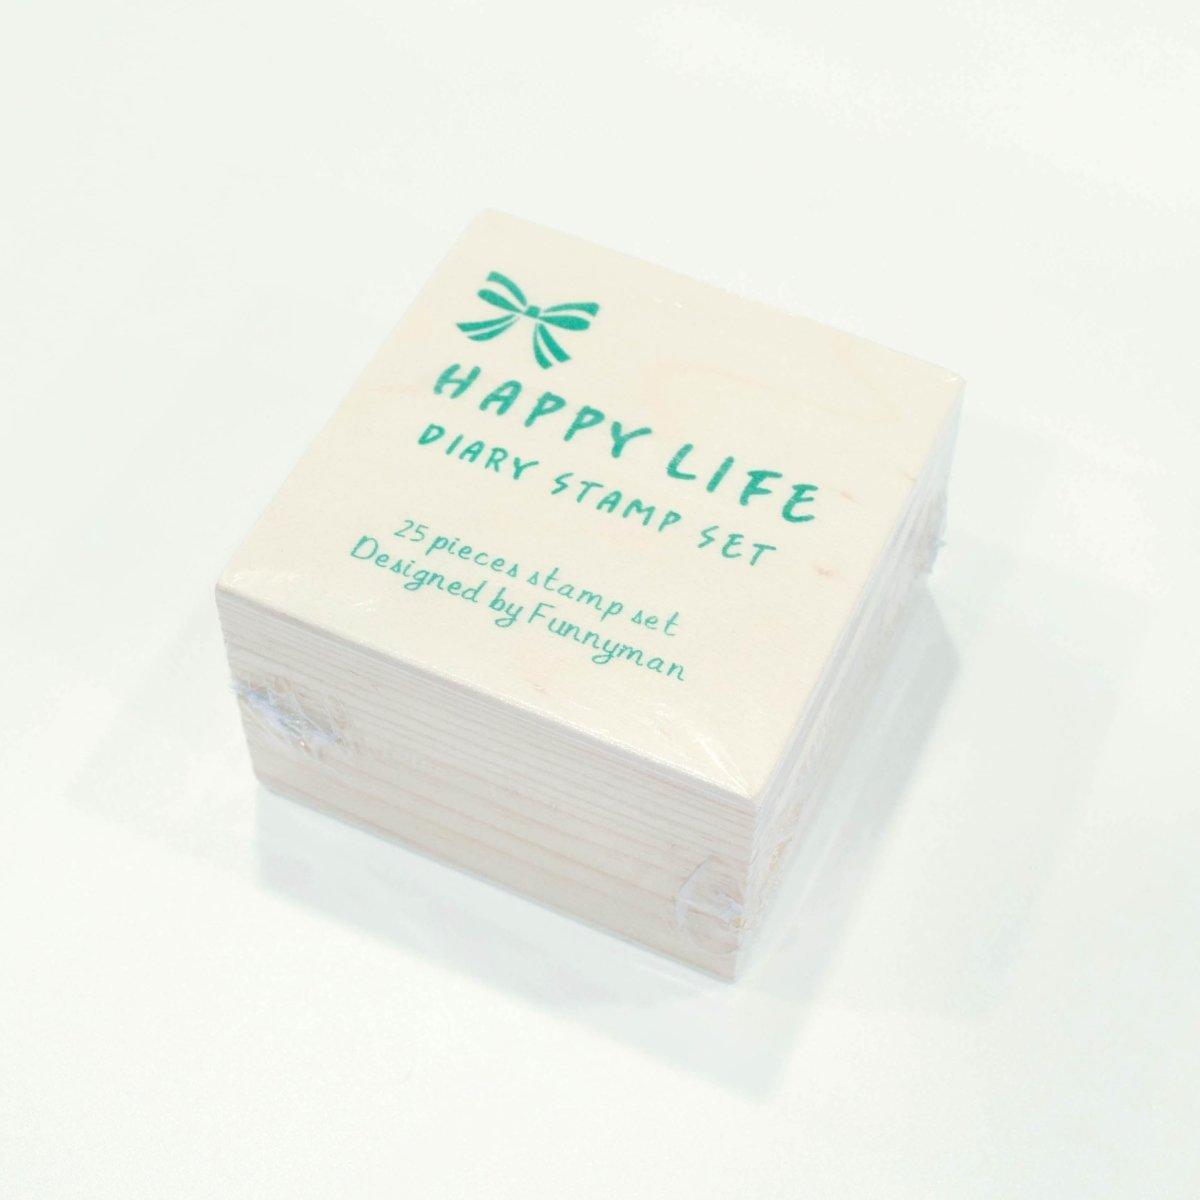 Original practical diary DIY wooden stamp set 25 into Happy LIFE NP-HEZQA-604 - CHL-STORE 